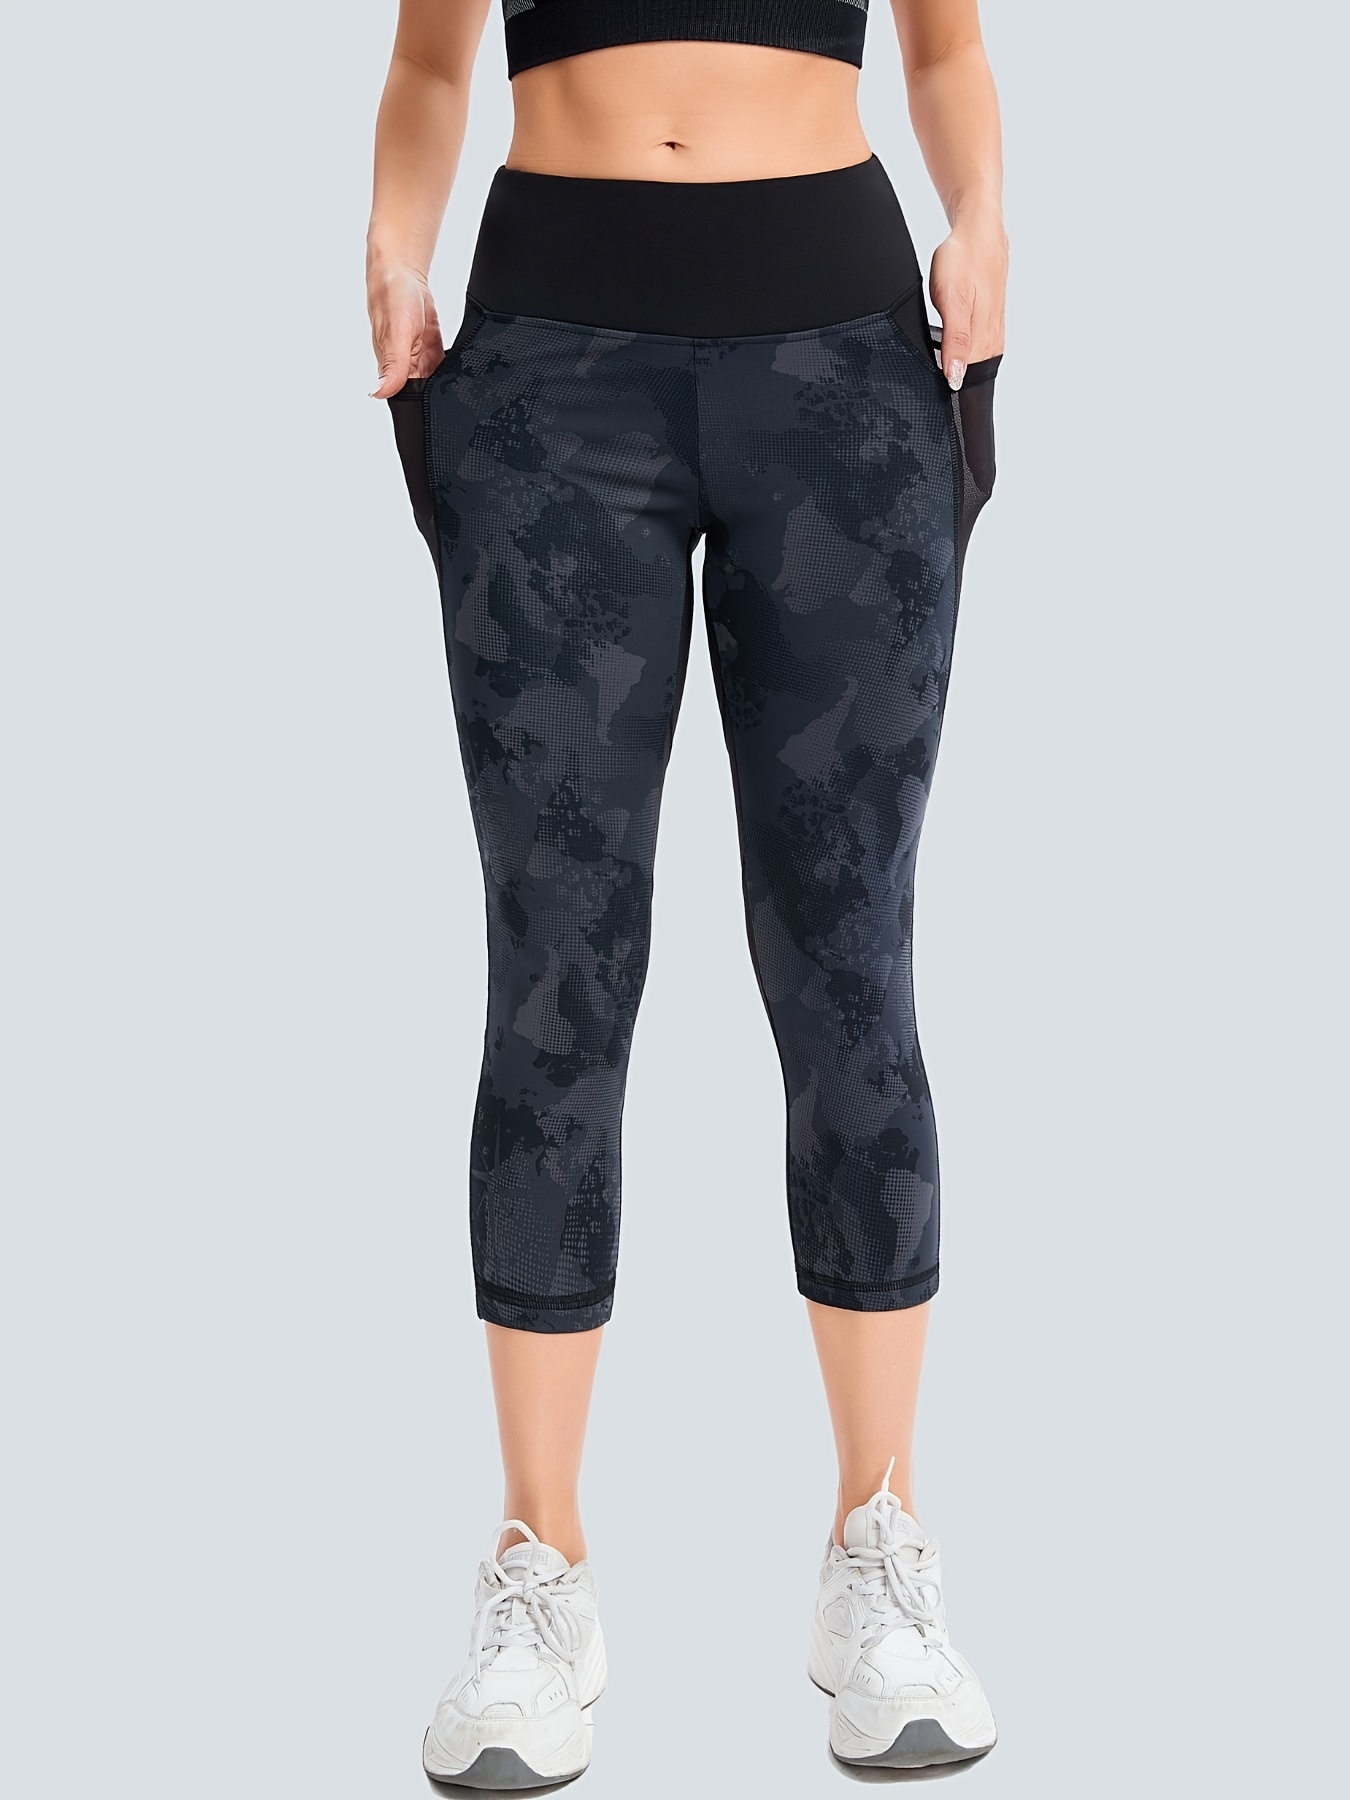 High-Waisted Camo Print Capri Leggings with Phone Pockets - Breathable  Women's Activewear for Sports and Yoga